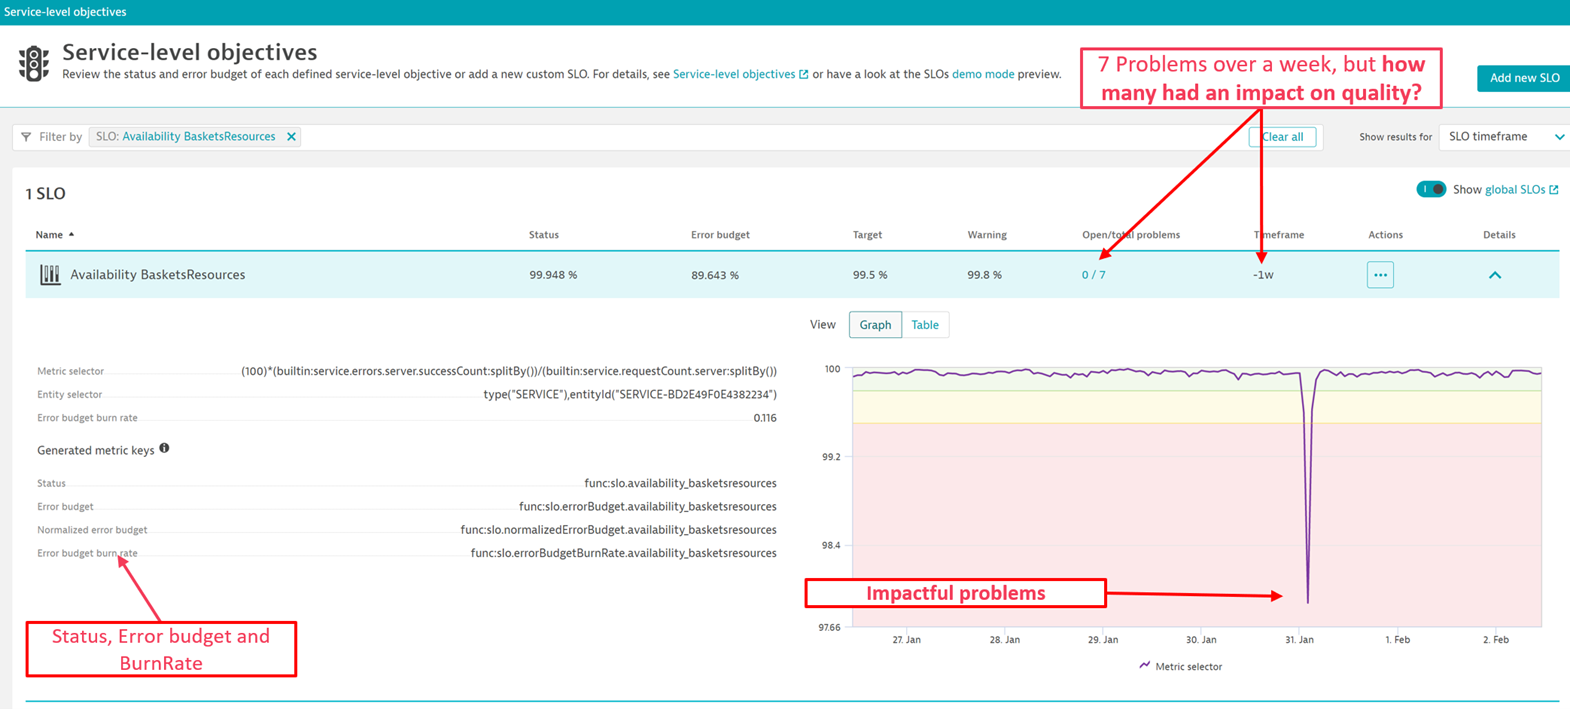 The Dynatrace platform finds issues with a service during SLO monitoring using error budgets